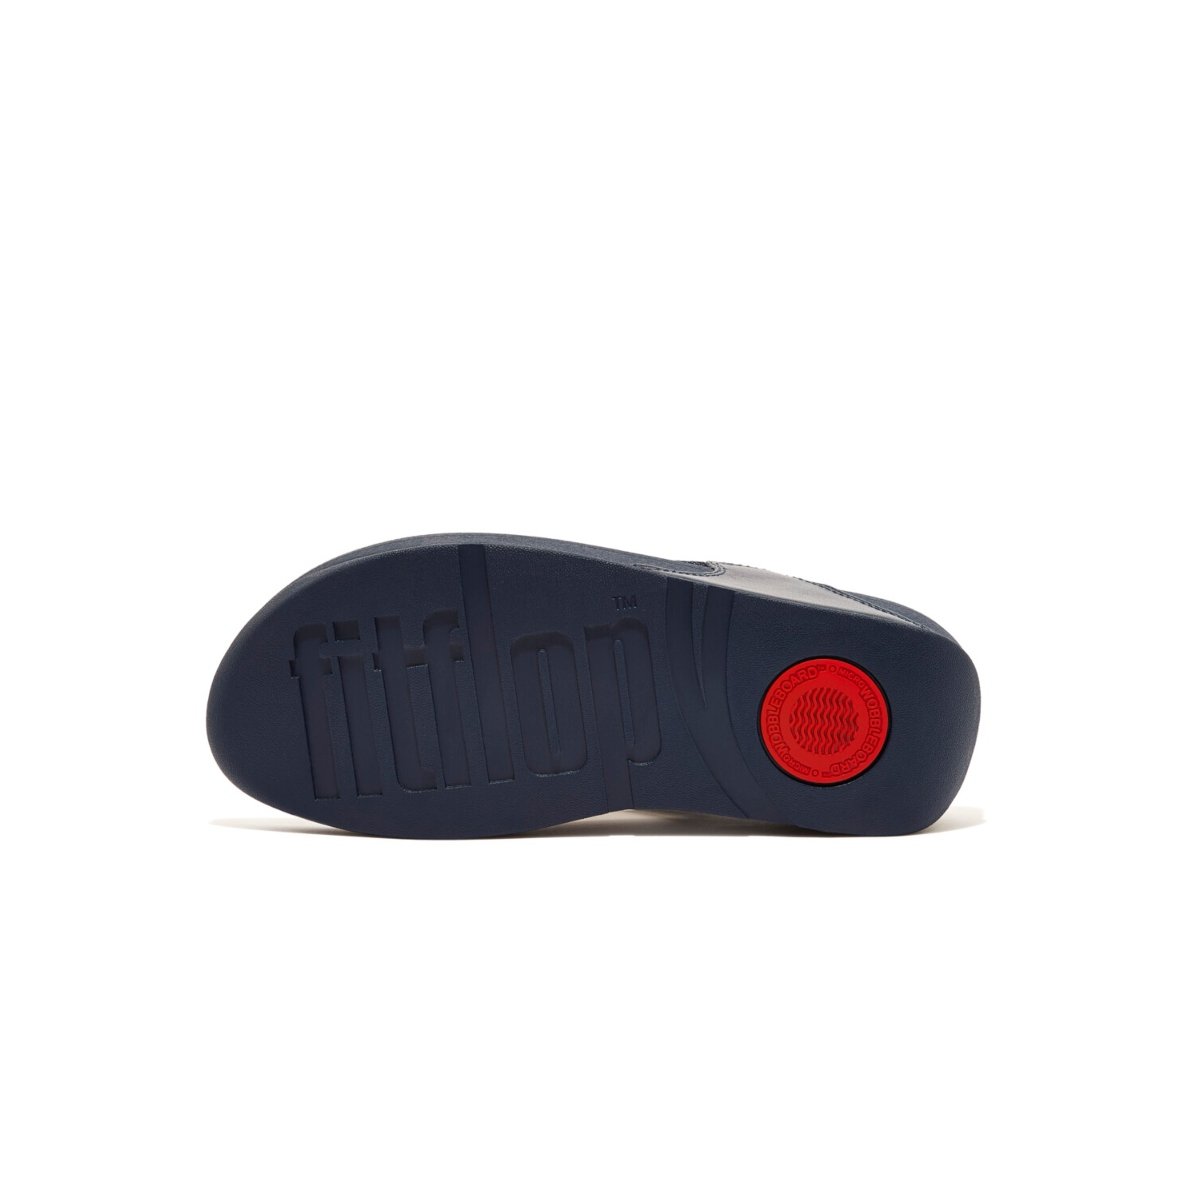 FitFlop LULU Glitz Toe-Post Sandals Midnight Navy outsole